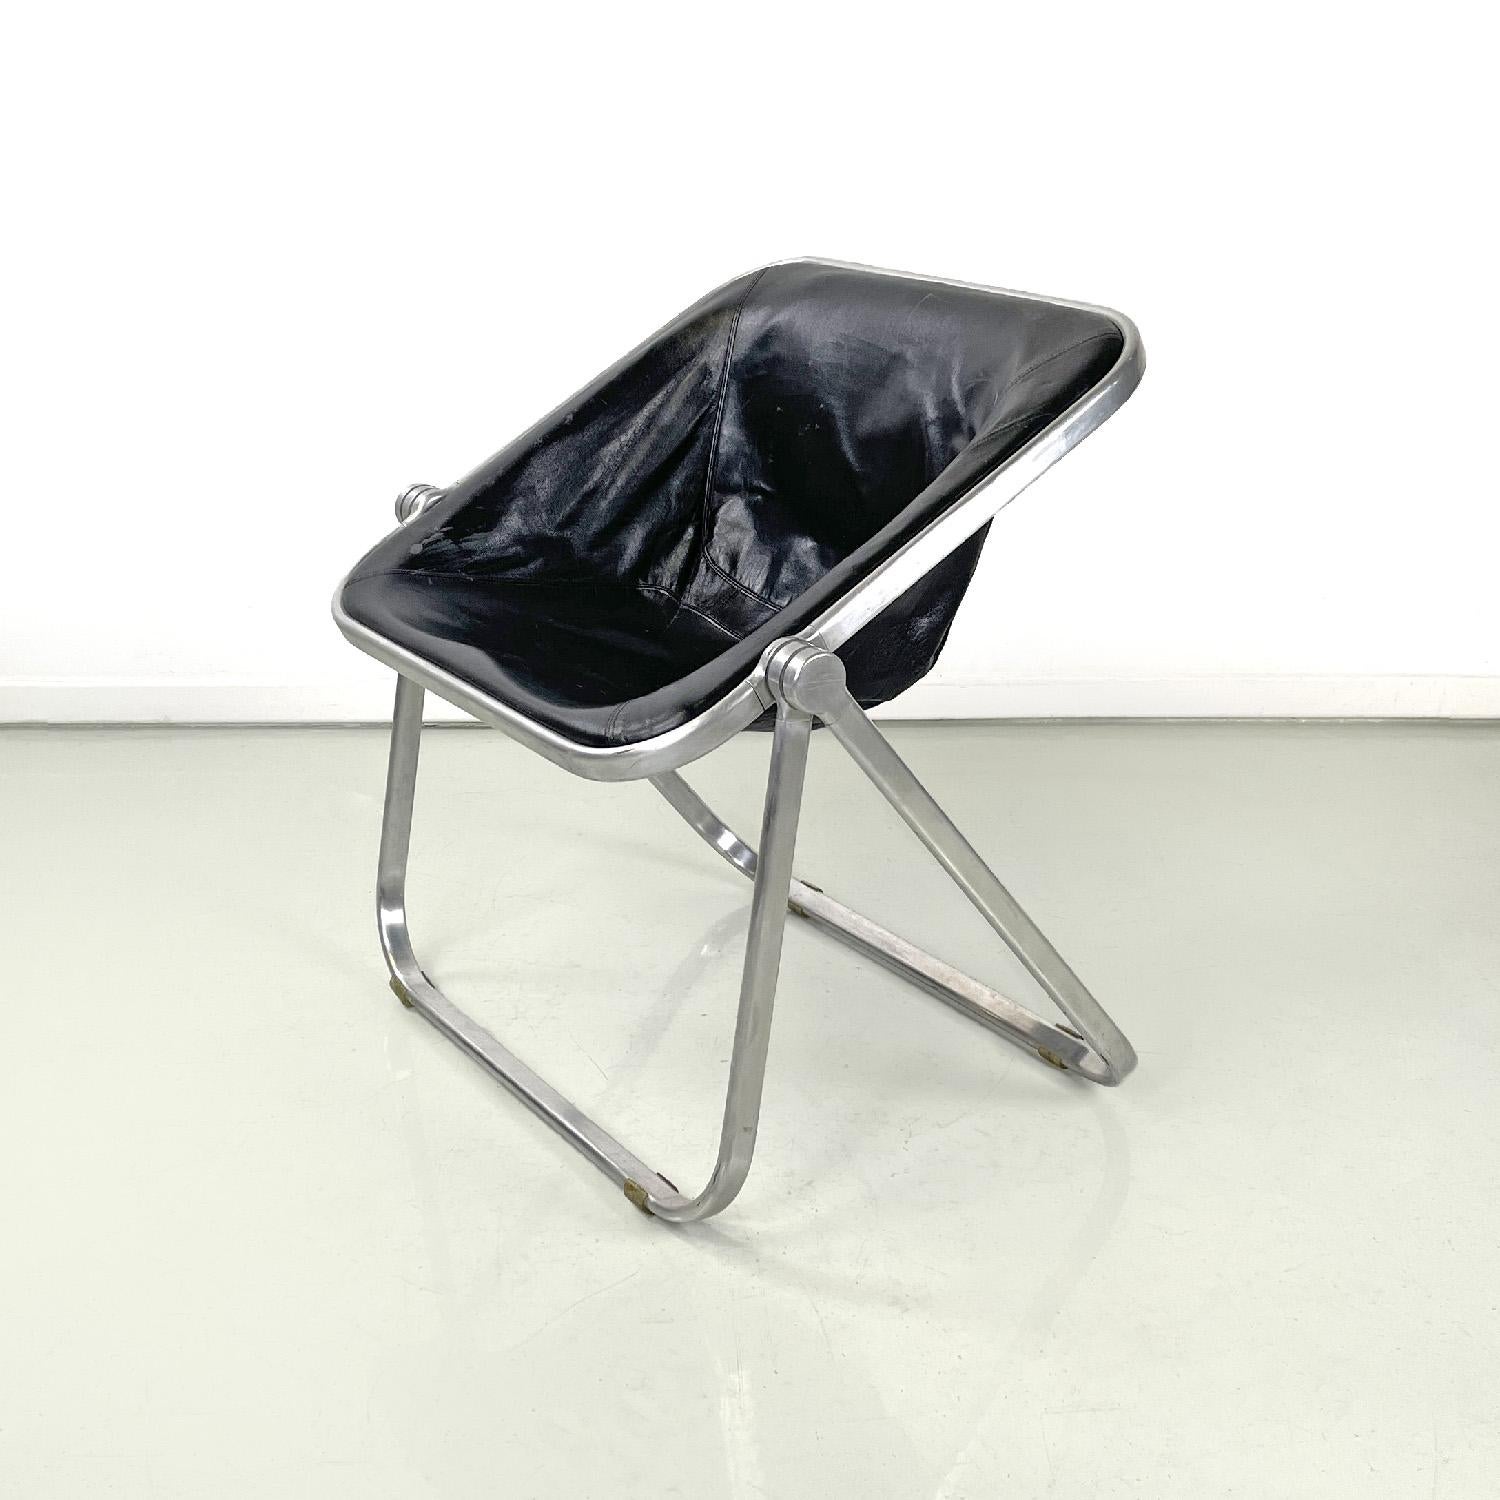 Italian leather Plona armchair by Giancarlo Piretti for Anonima Catelli, 1970s
Foldable armchair mod Plona, with chromed oval aluminum tube structure and original black leather seat.
Production by Anonima Castelli from 1970s and drawing by Giancarlo